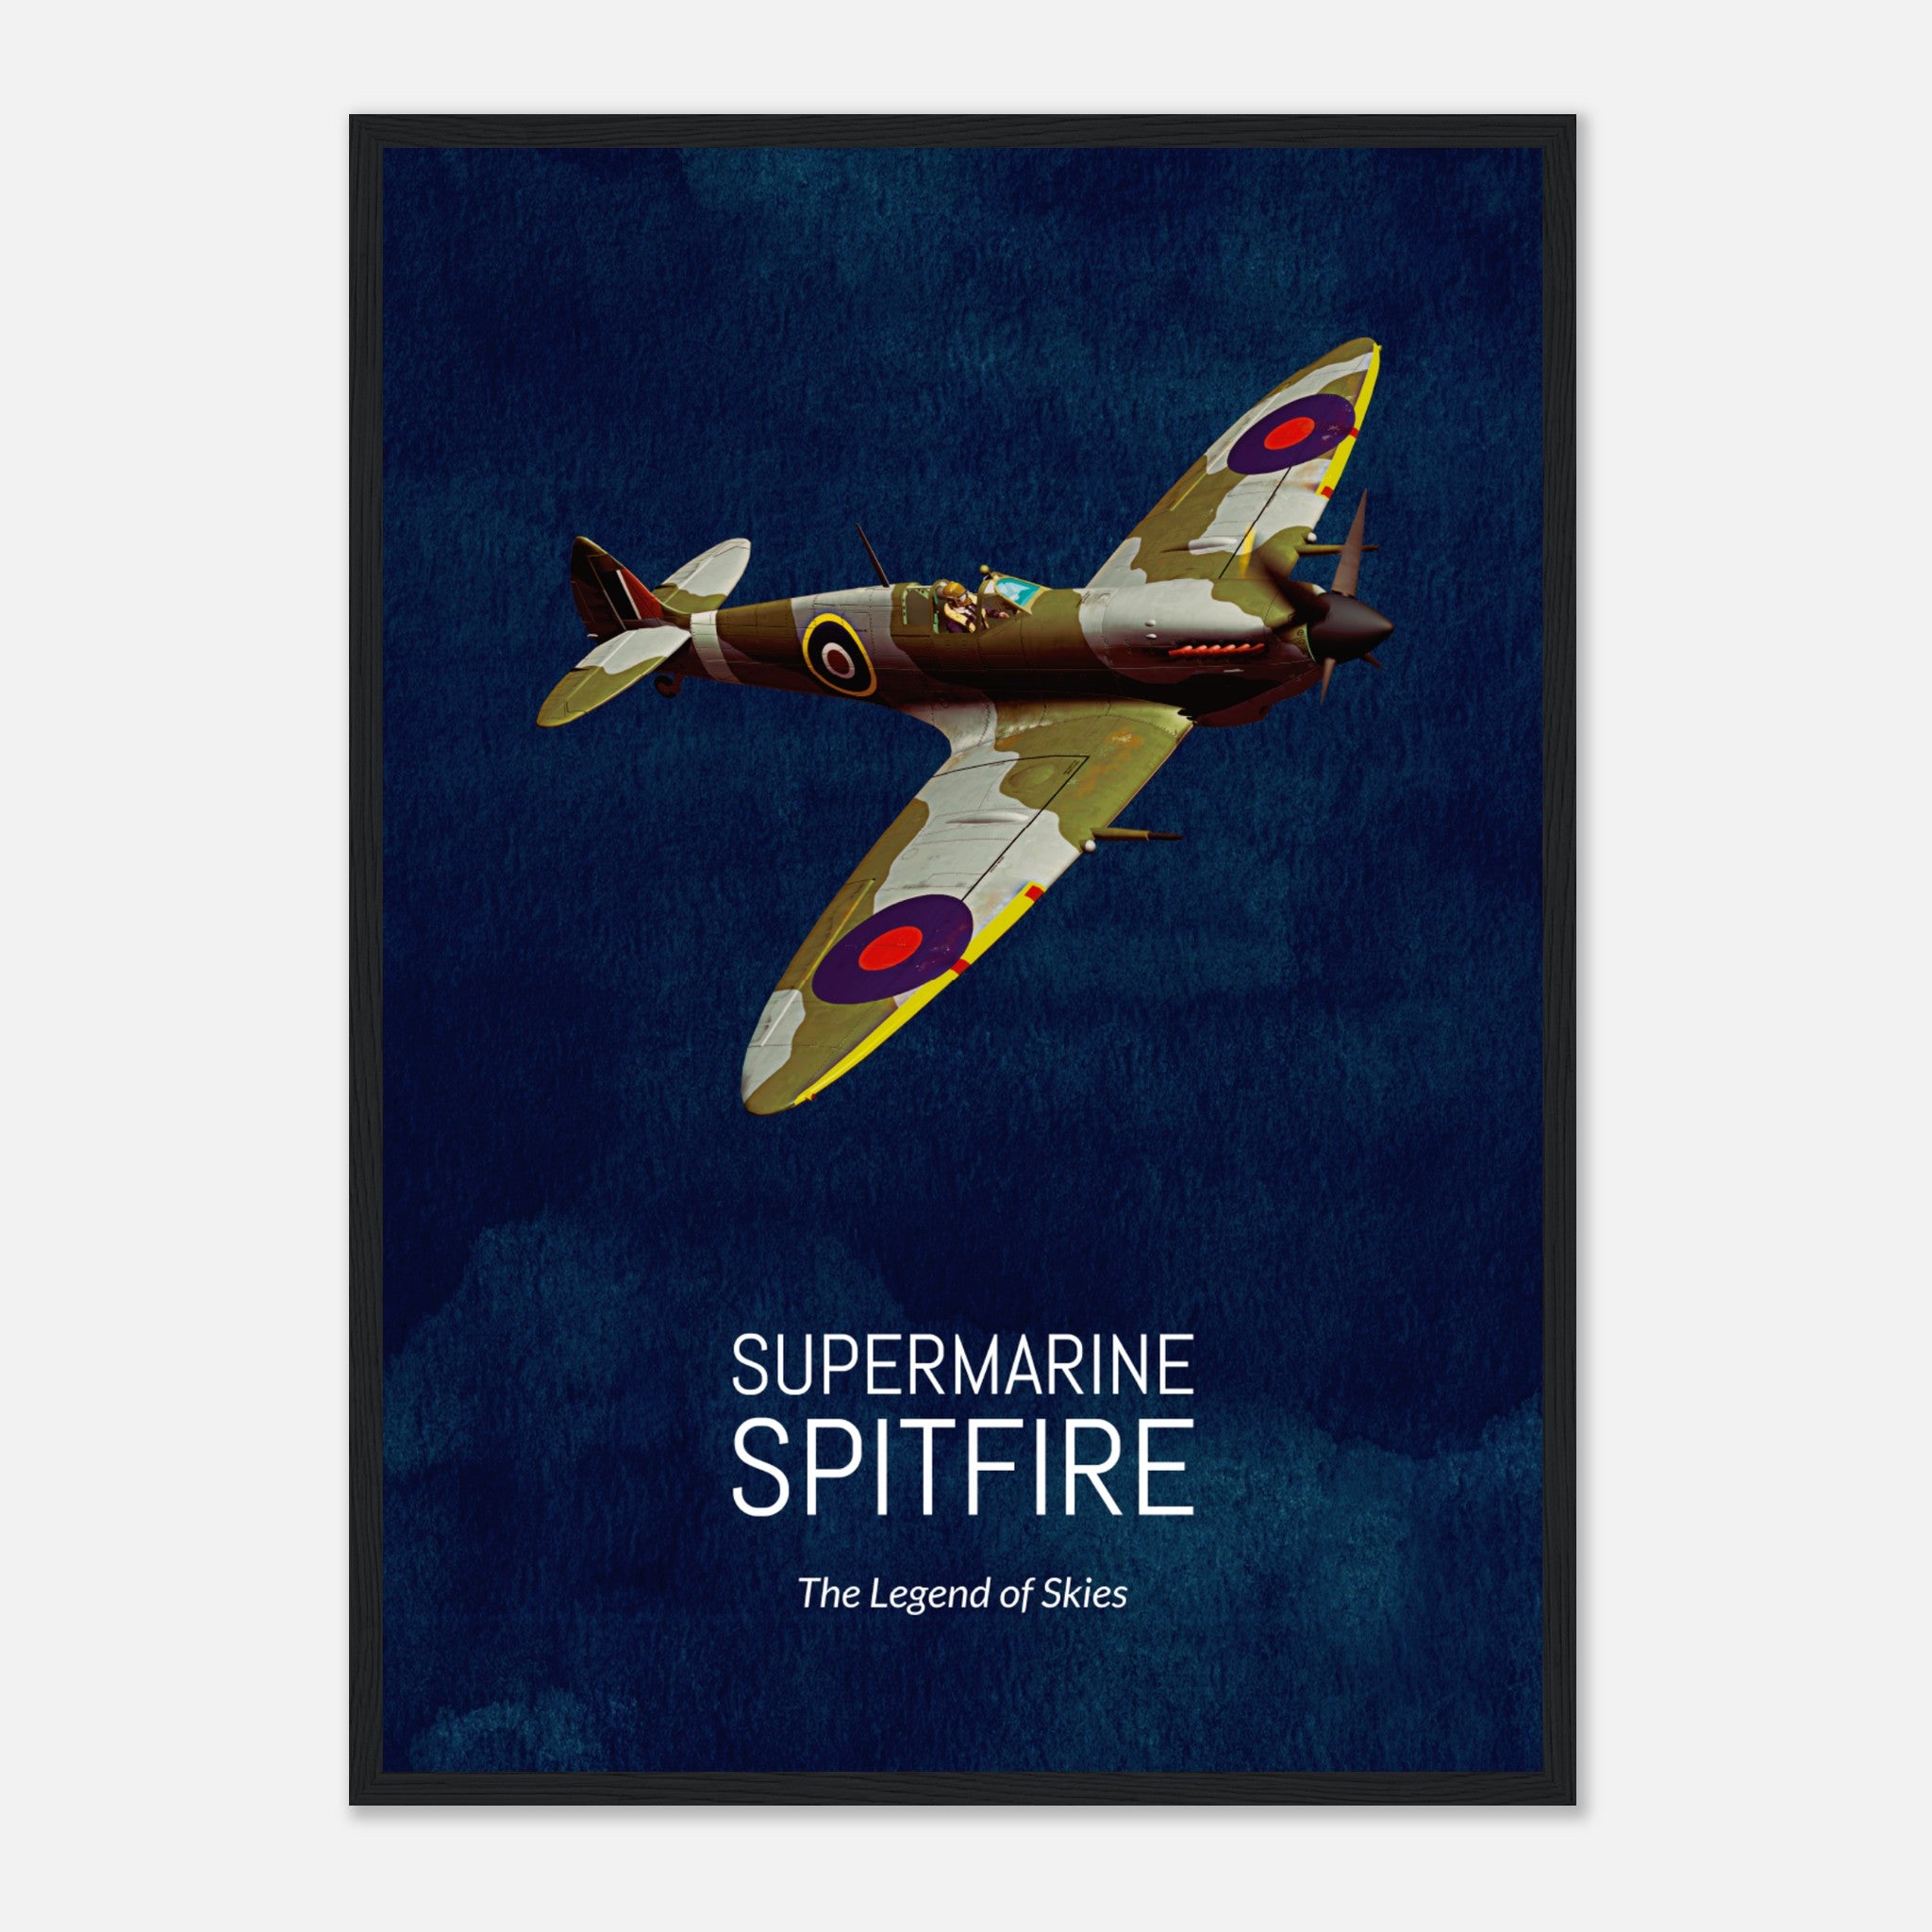 Spitfire in Action Poster